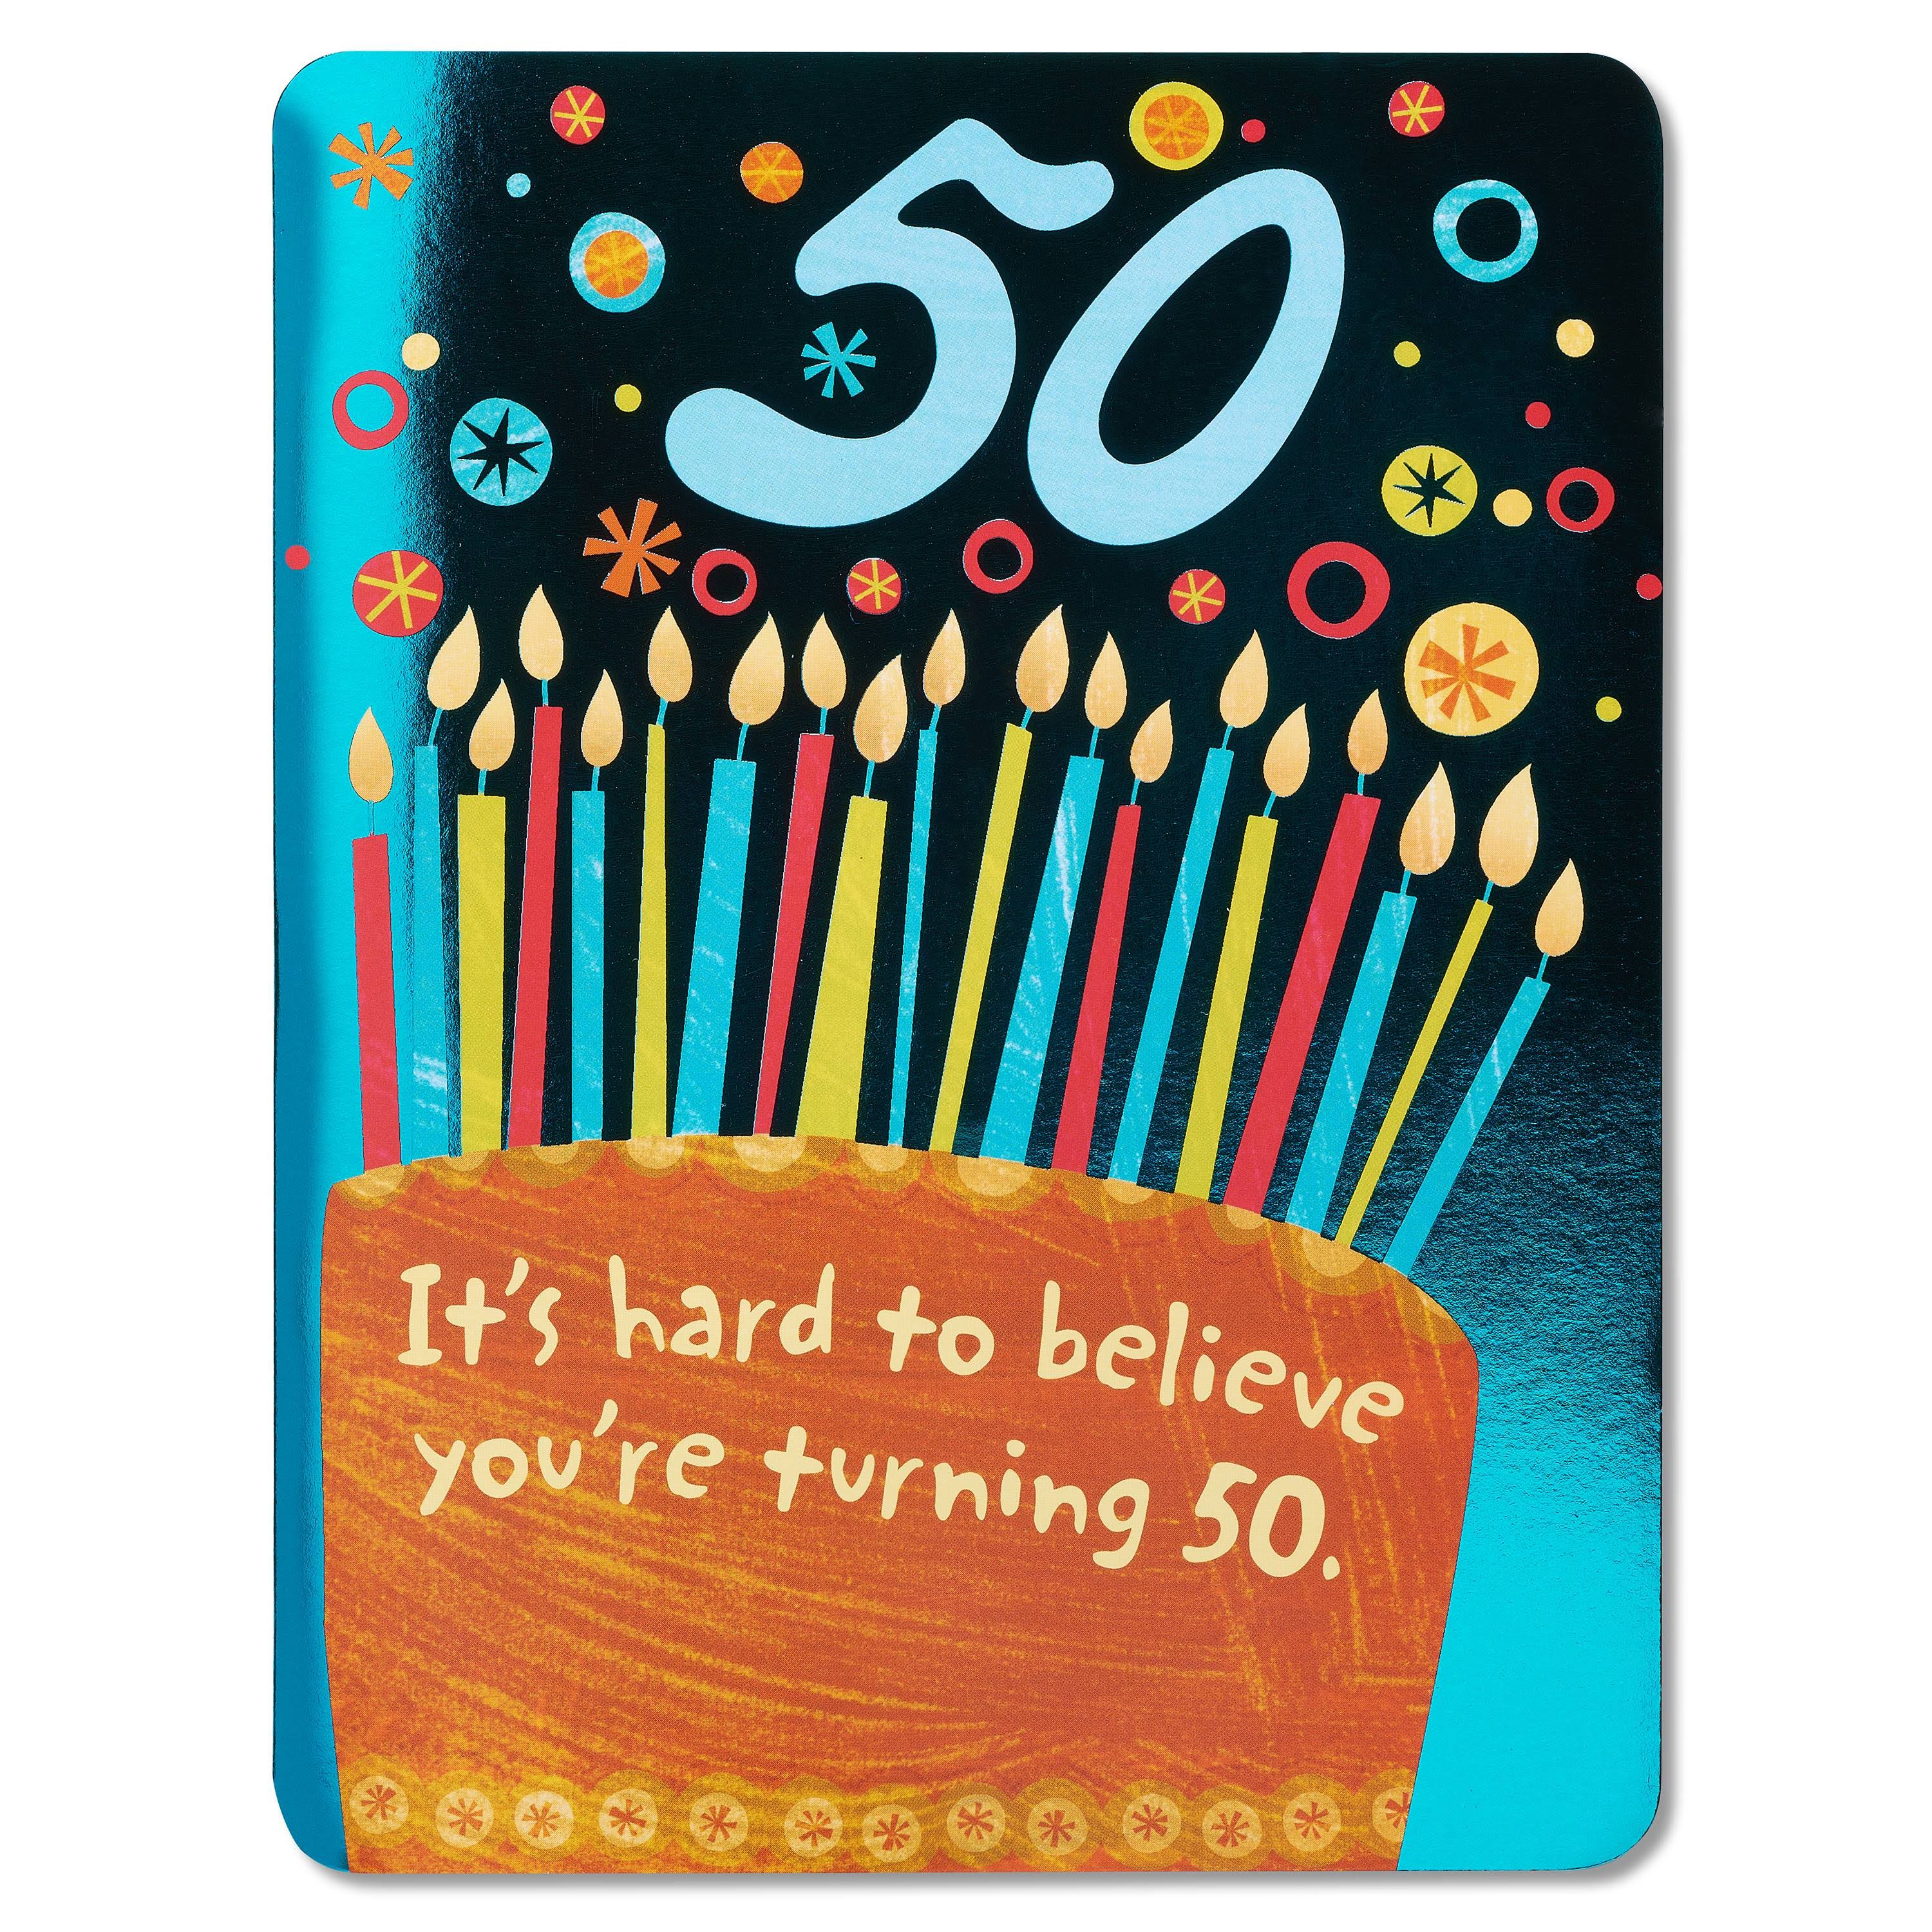 American Greetings Hard To Believe 50th Birthday Card with Foil | American Greetings | Party Supplies | Delivery Guaranteed